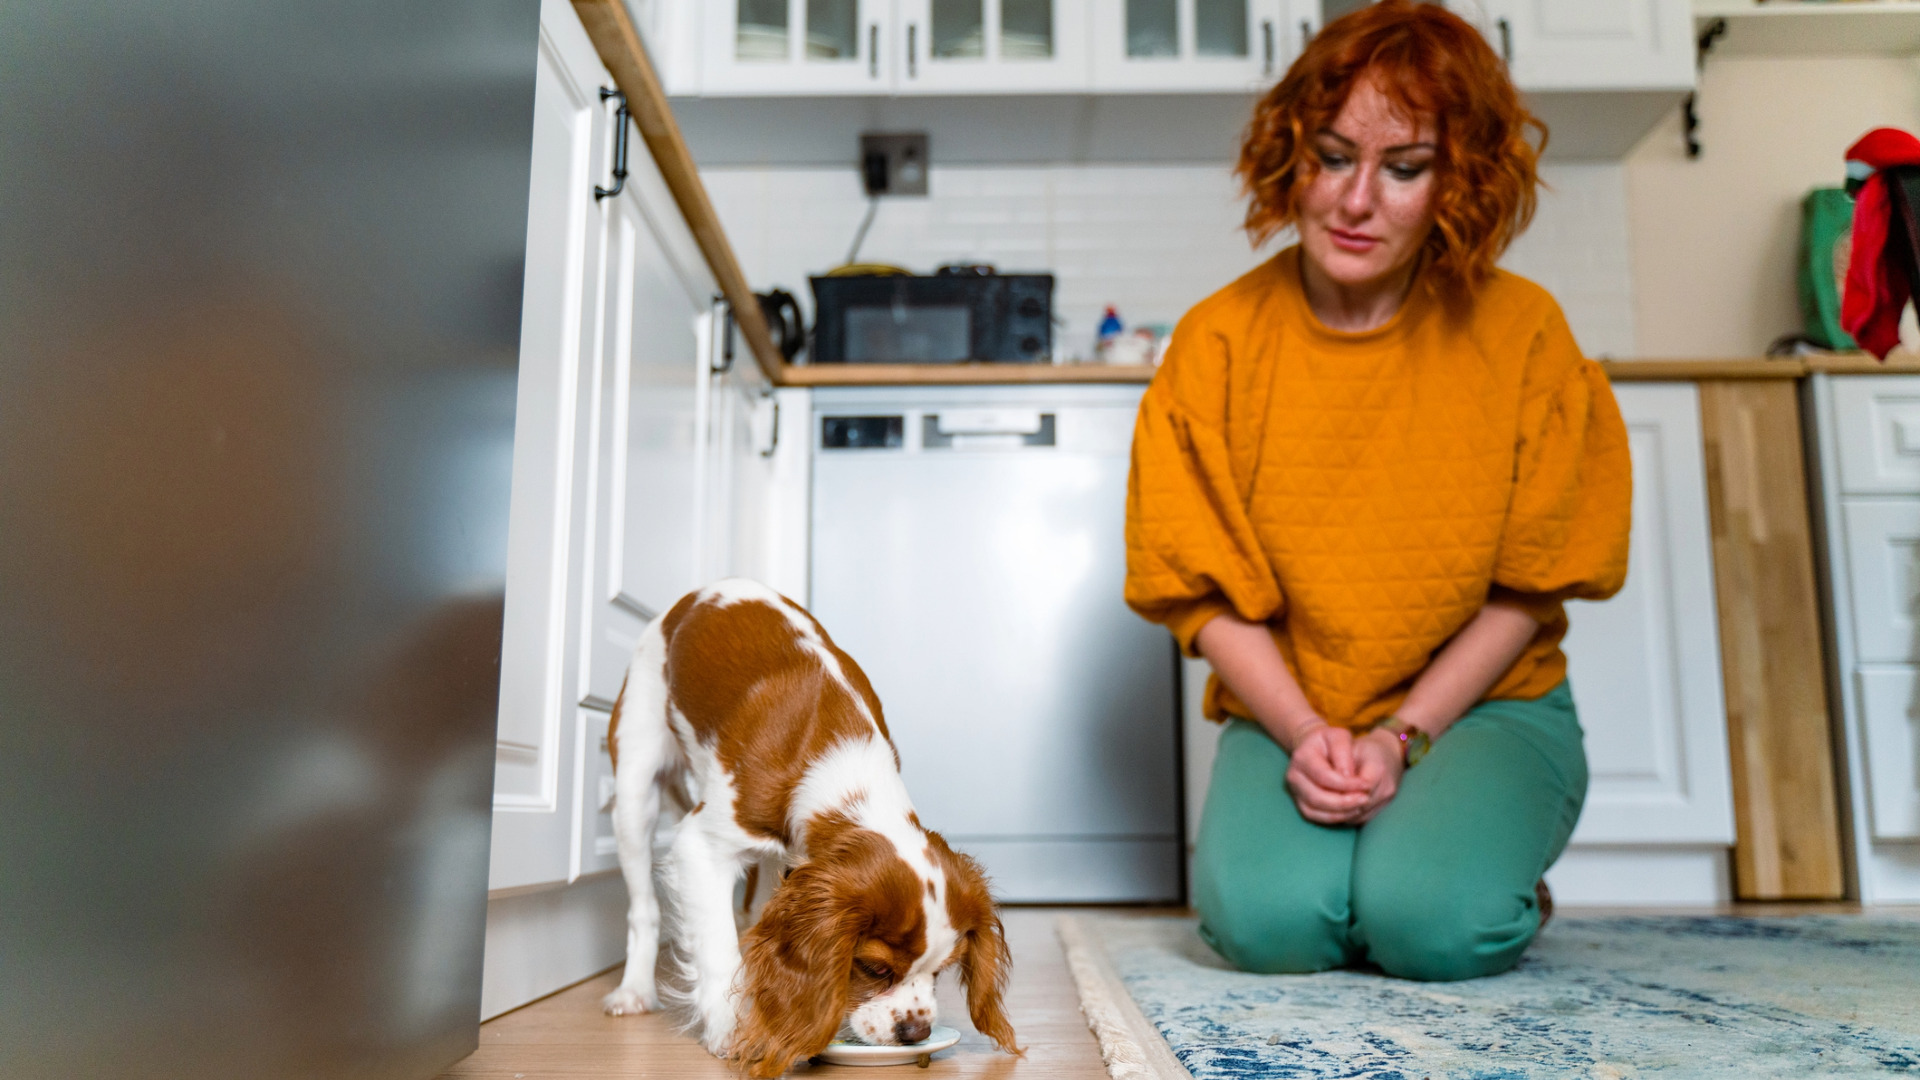 woman sitting next to dog who's eating